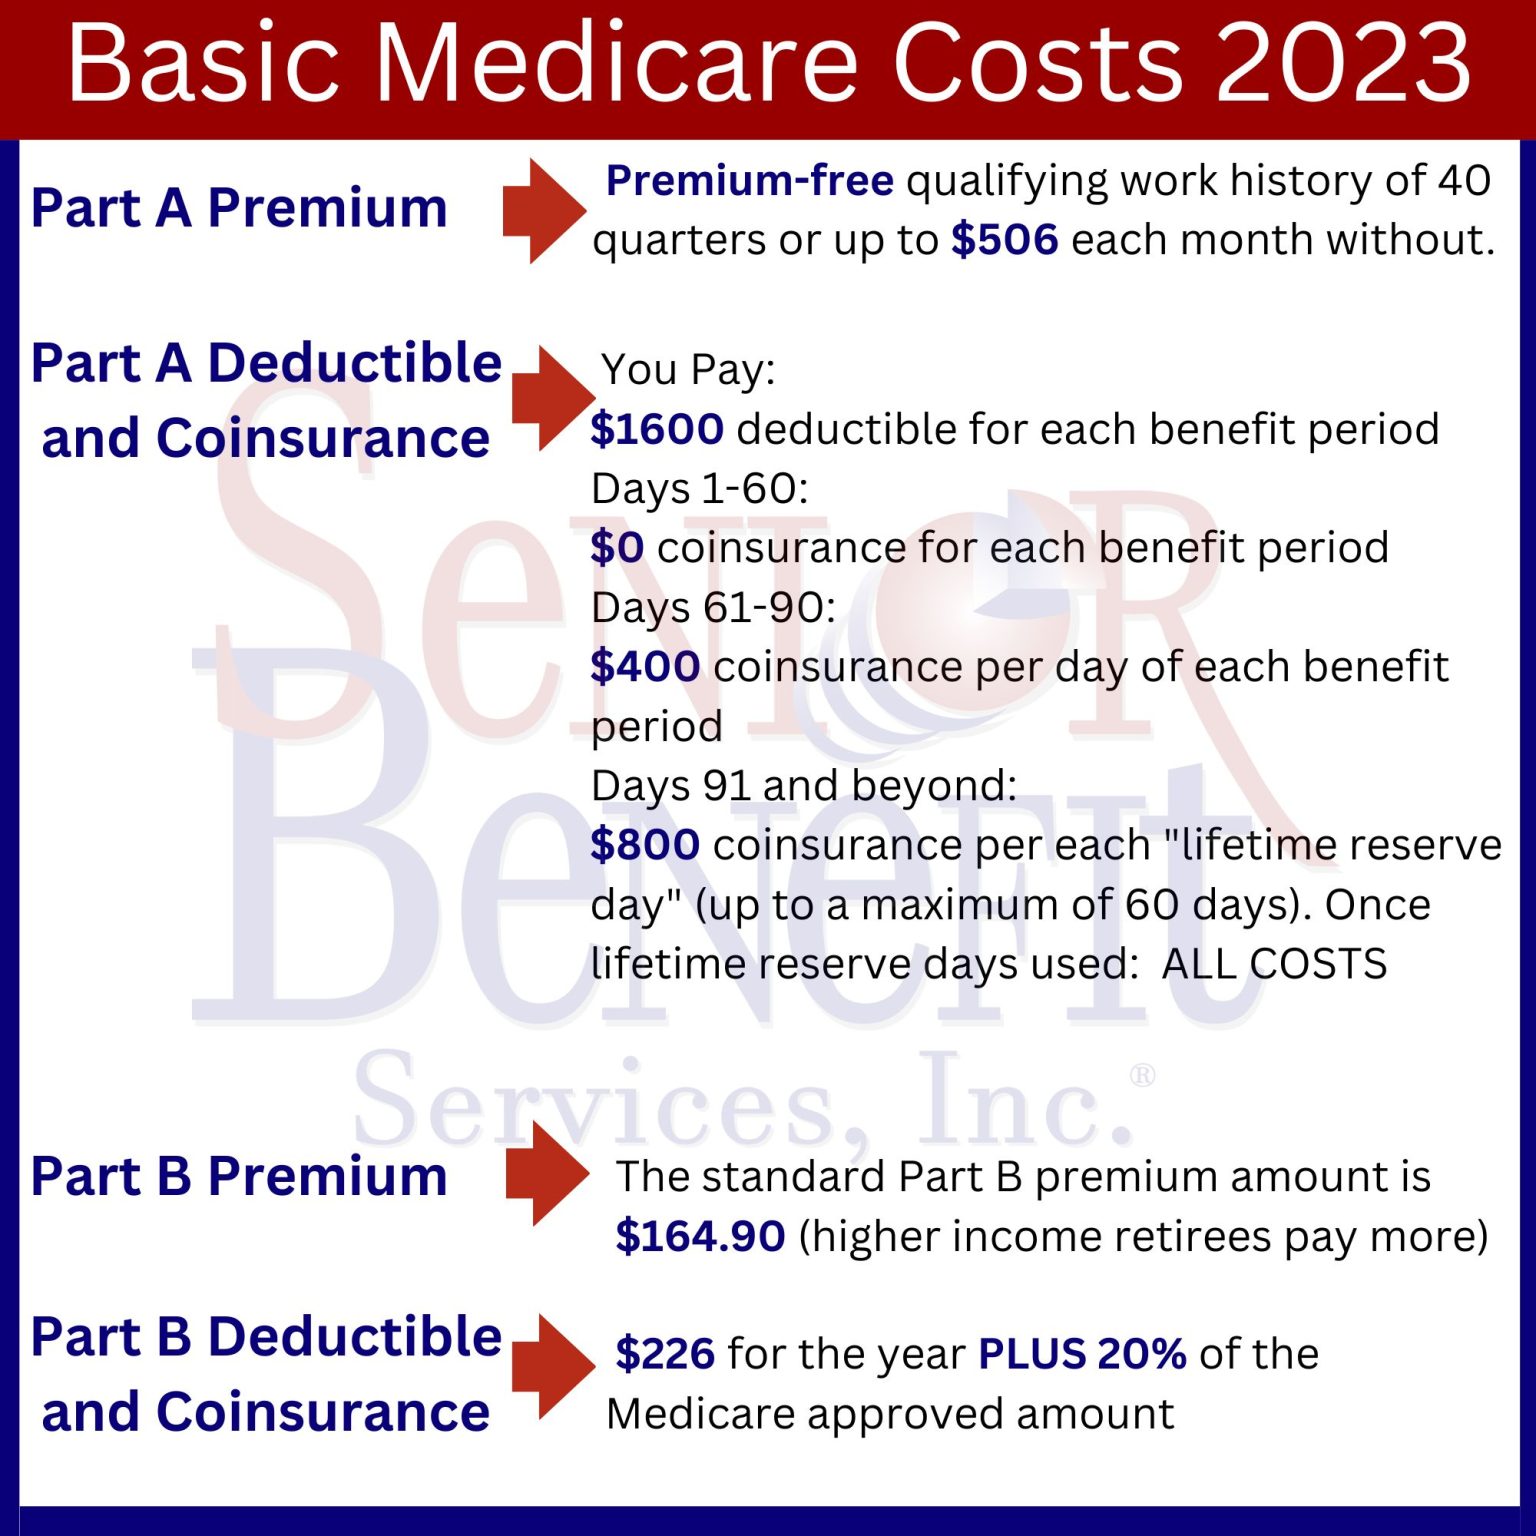 What Will Medicare Cost Me in 2023? Senior Benefit Services, Inc